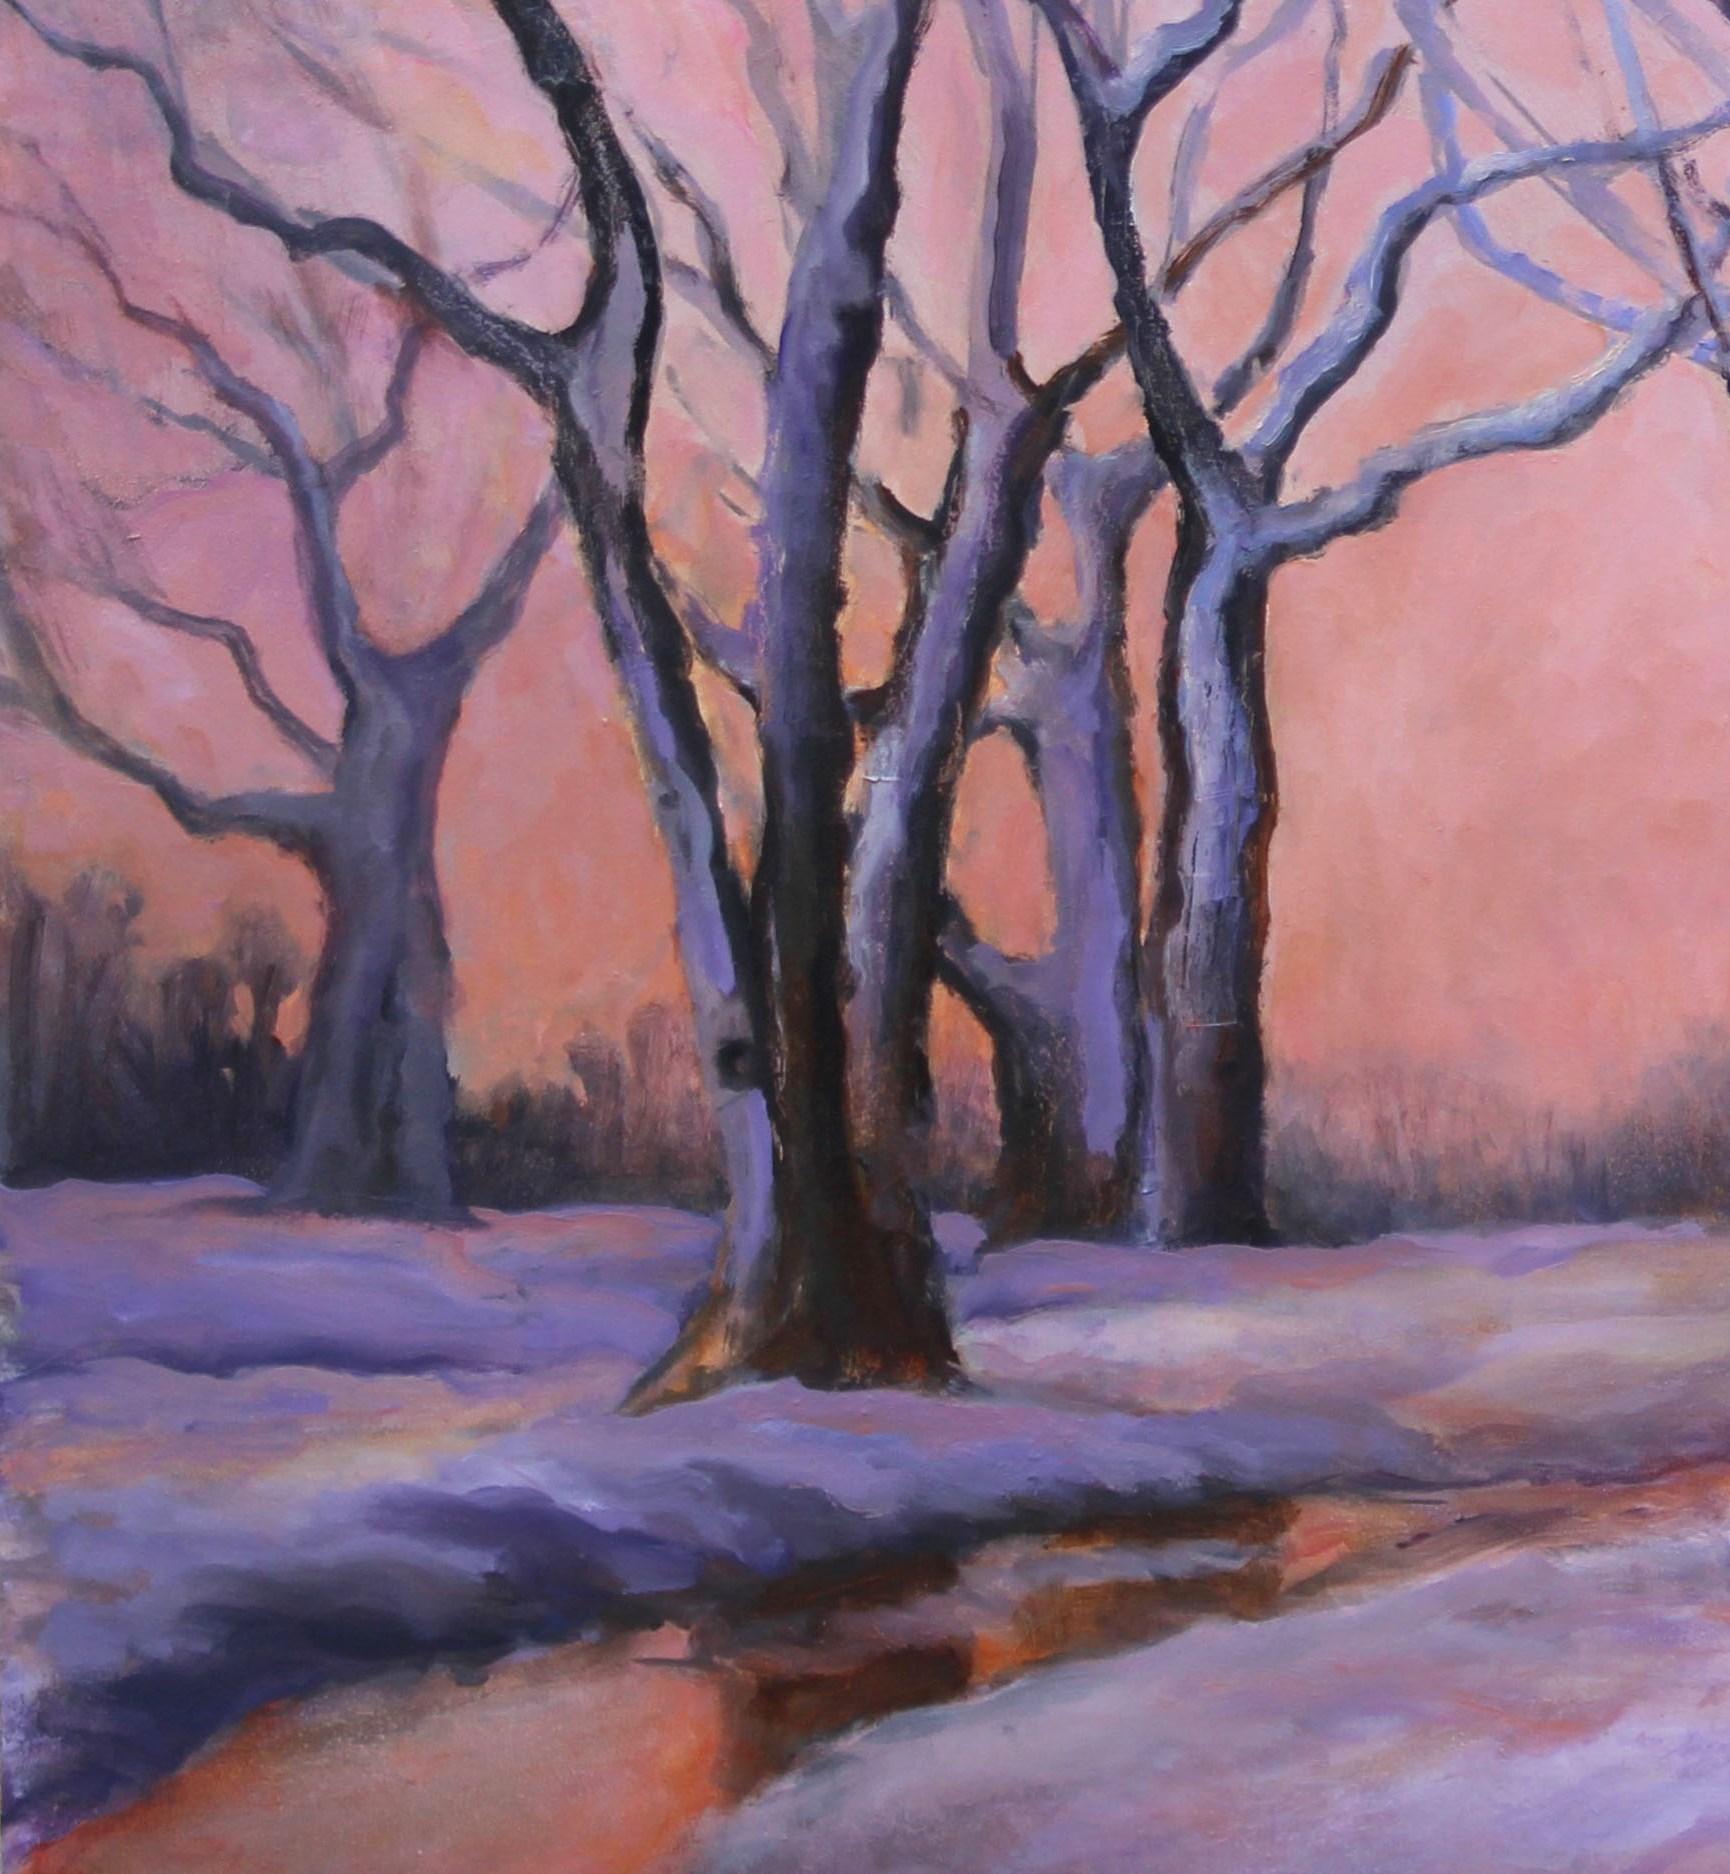 Large Dramatic Colorful Evening Sunset in Chilly Snowy Landscape with Fox  - Painting by Beth Carlson